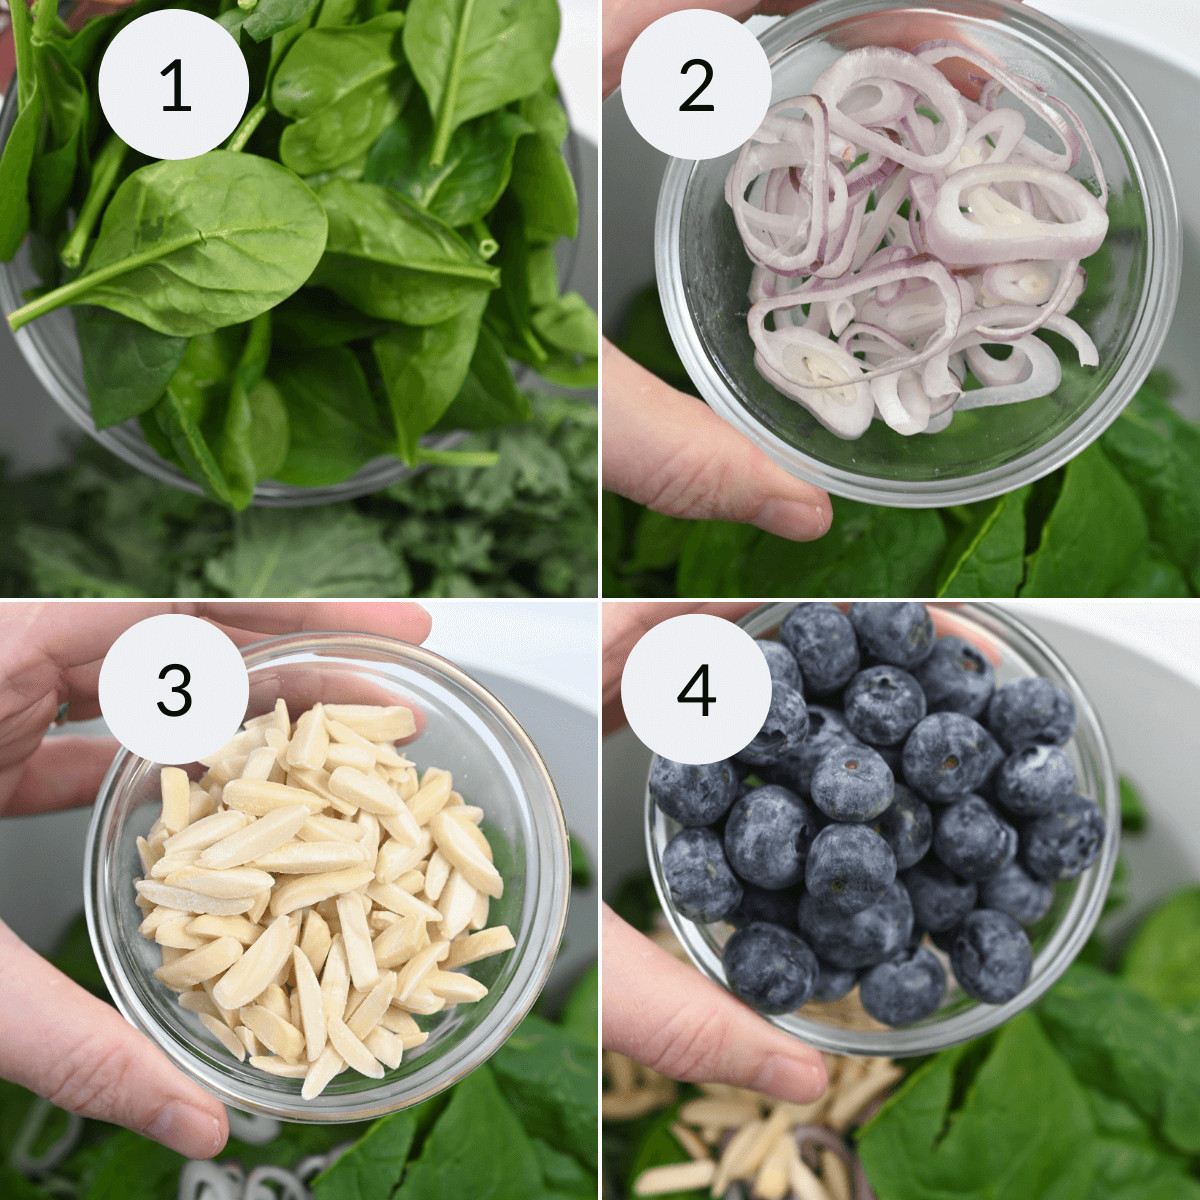 Four pictures demonstrating how to prepare the meal.